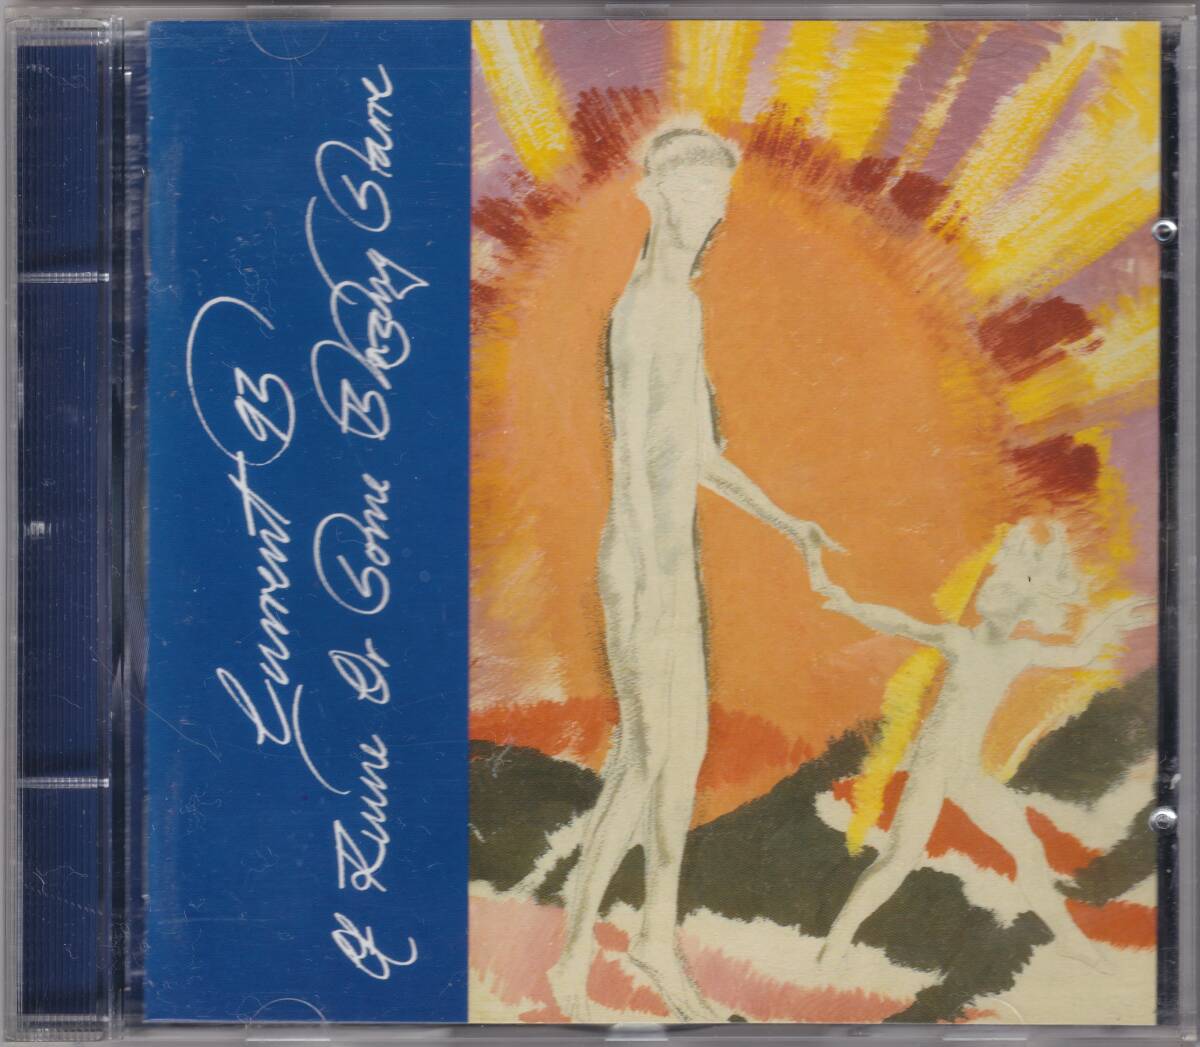 CURRENT 93///カレント93///OF RUINE OR SOME BLAZING STARRE///DURTRO 018 CD///輸入盤///オリジナル盤_画像1